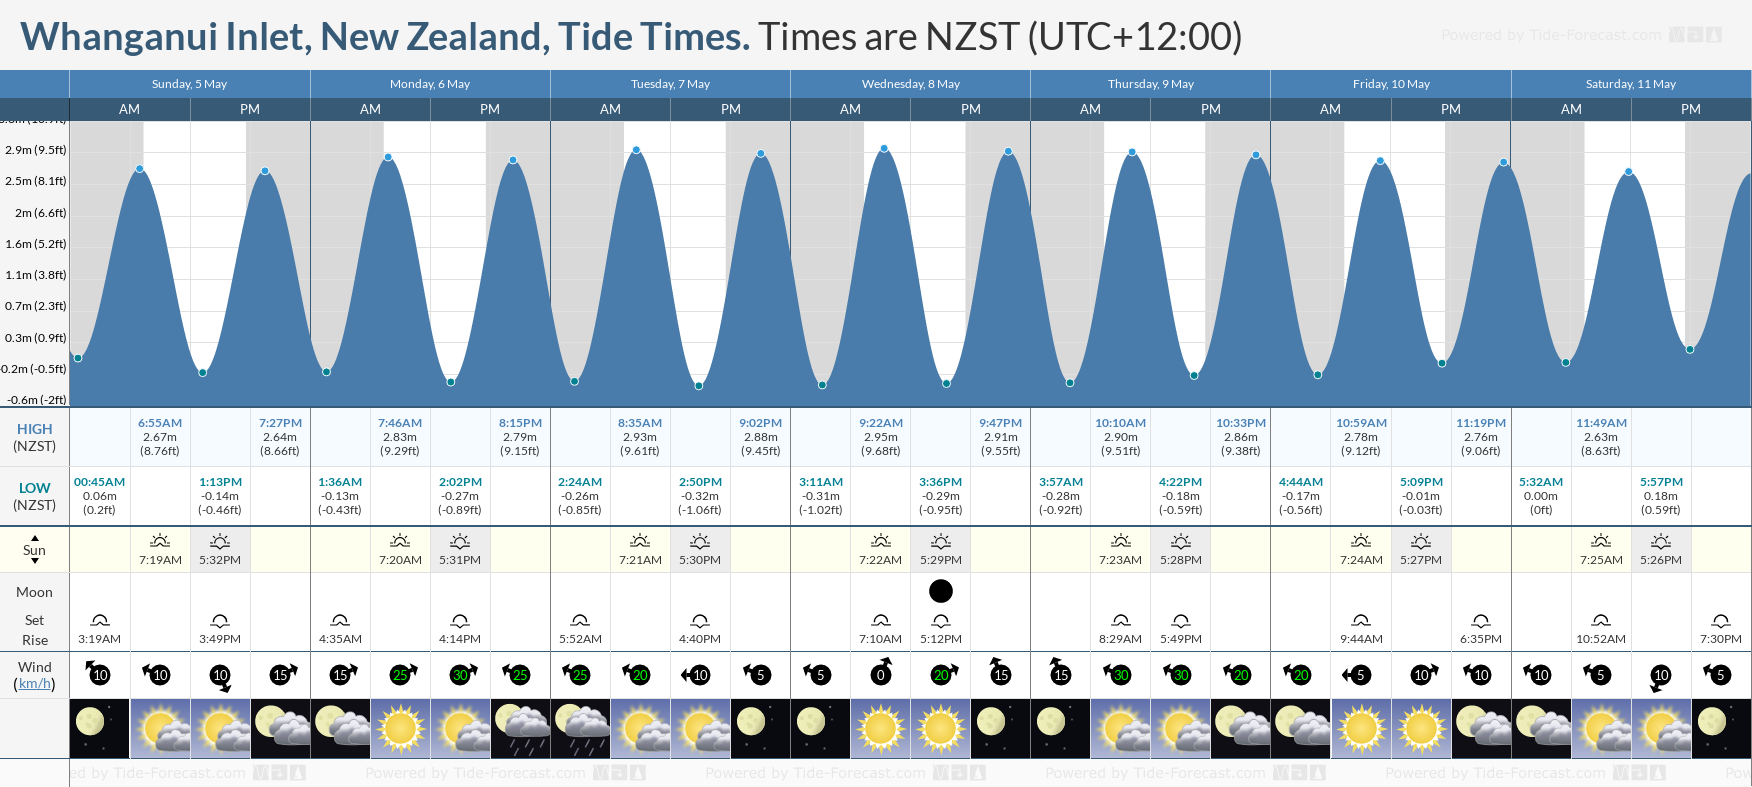 Whanganui Inlet, New Zealand Tide Chart including high and low tide tide times for the next 7 days